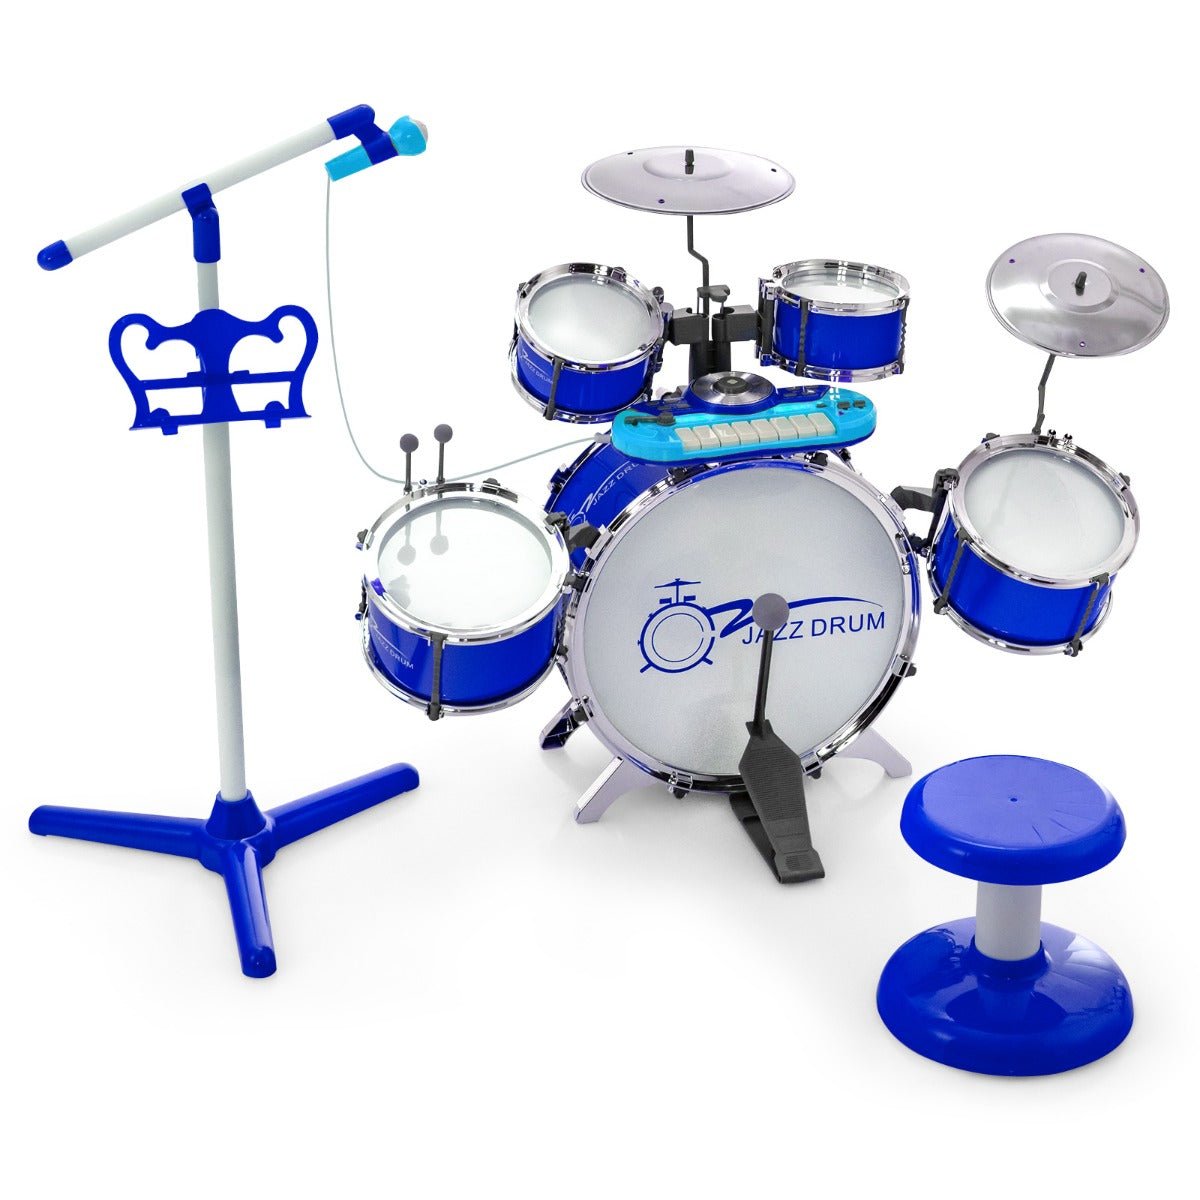 Kids Blue Drum Keyboard Set with Stool & Microphone Stand - Musical Fun!